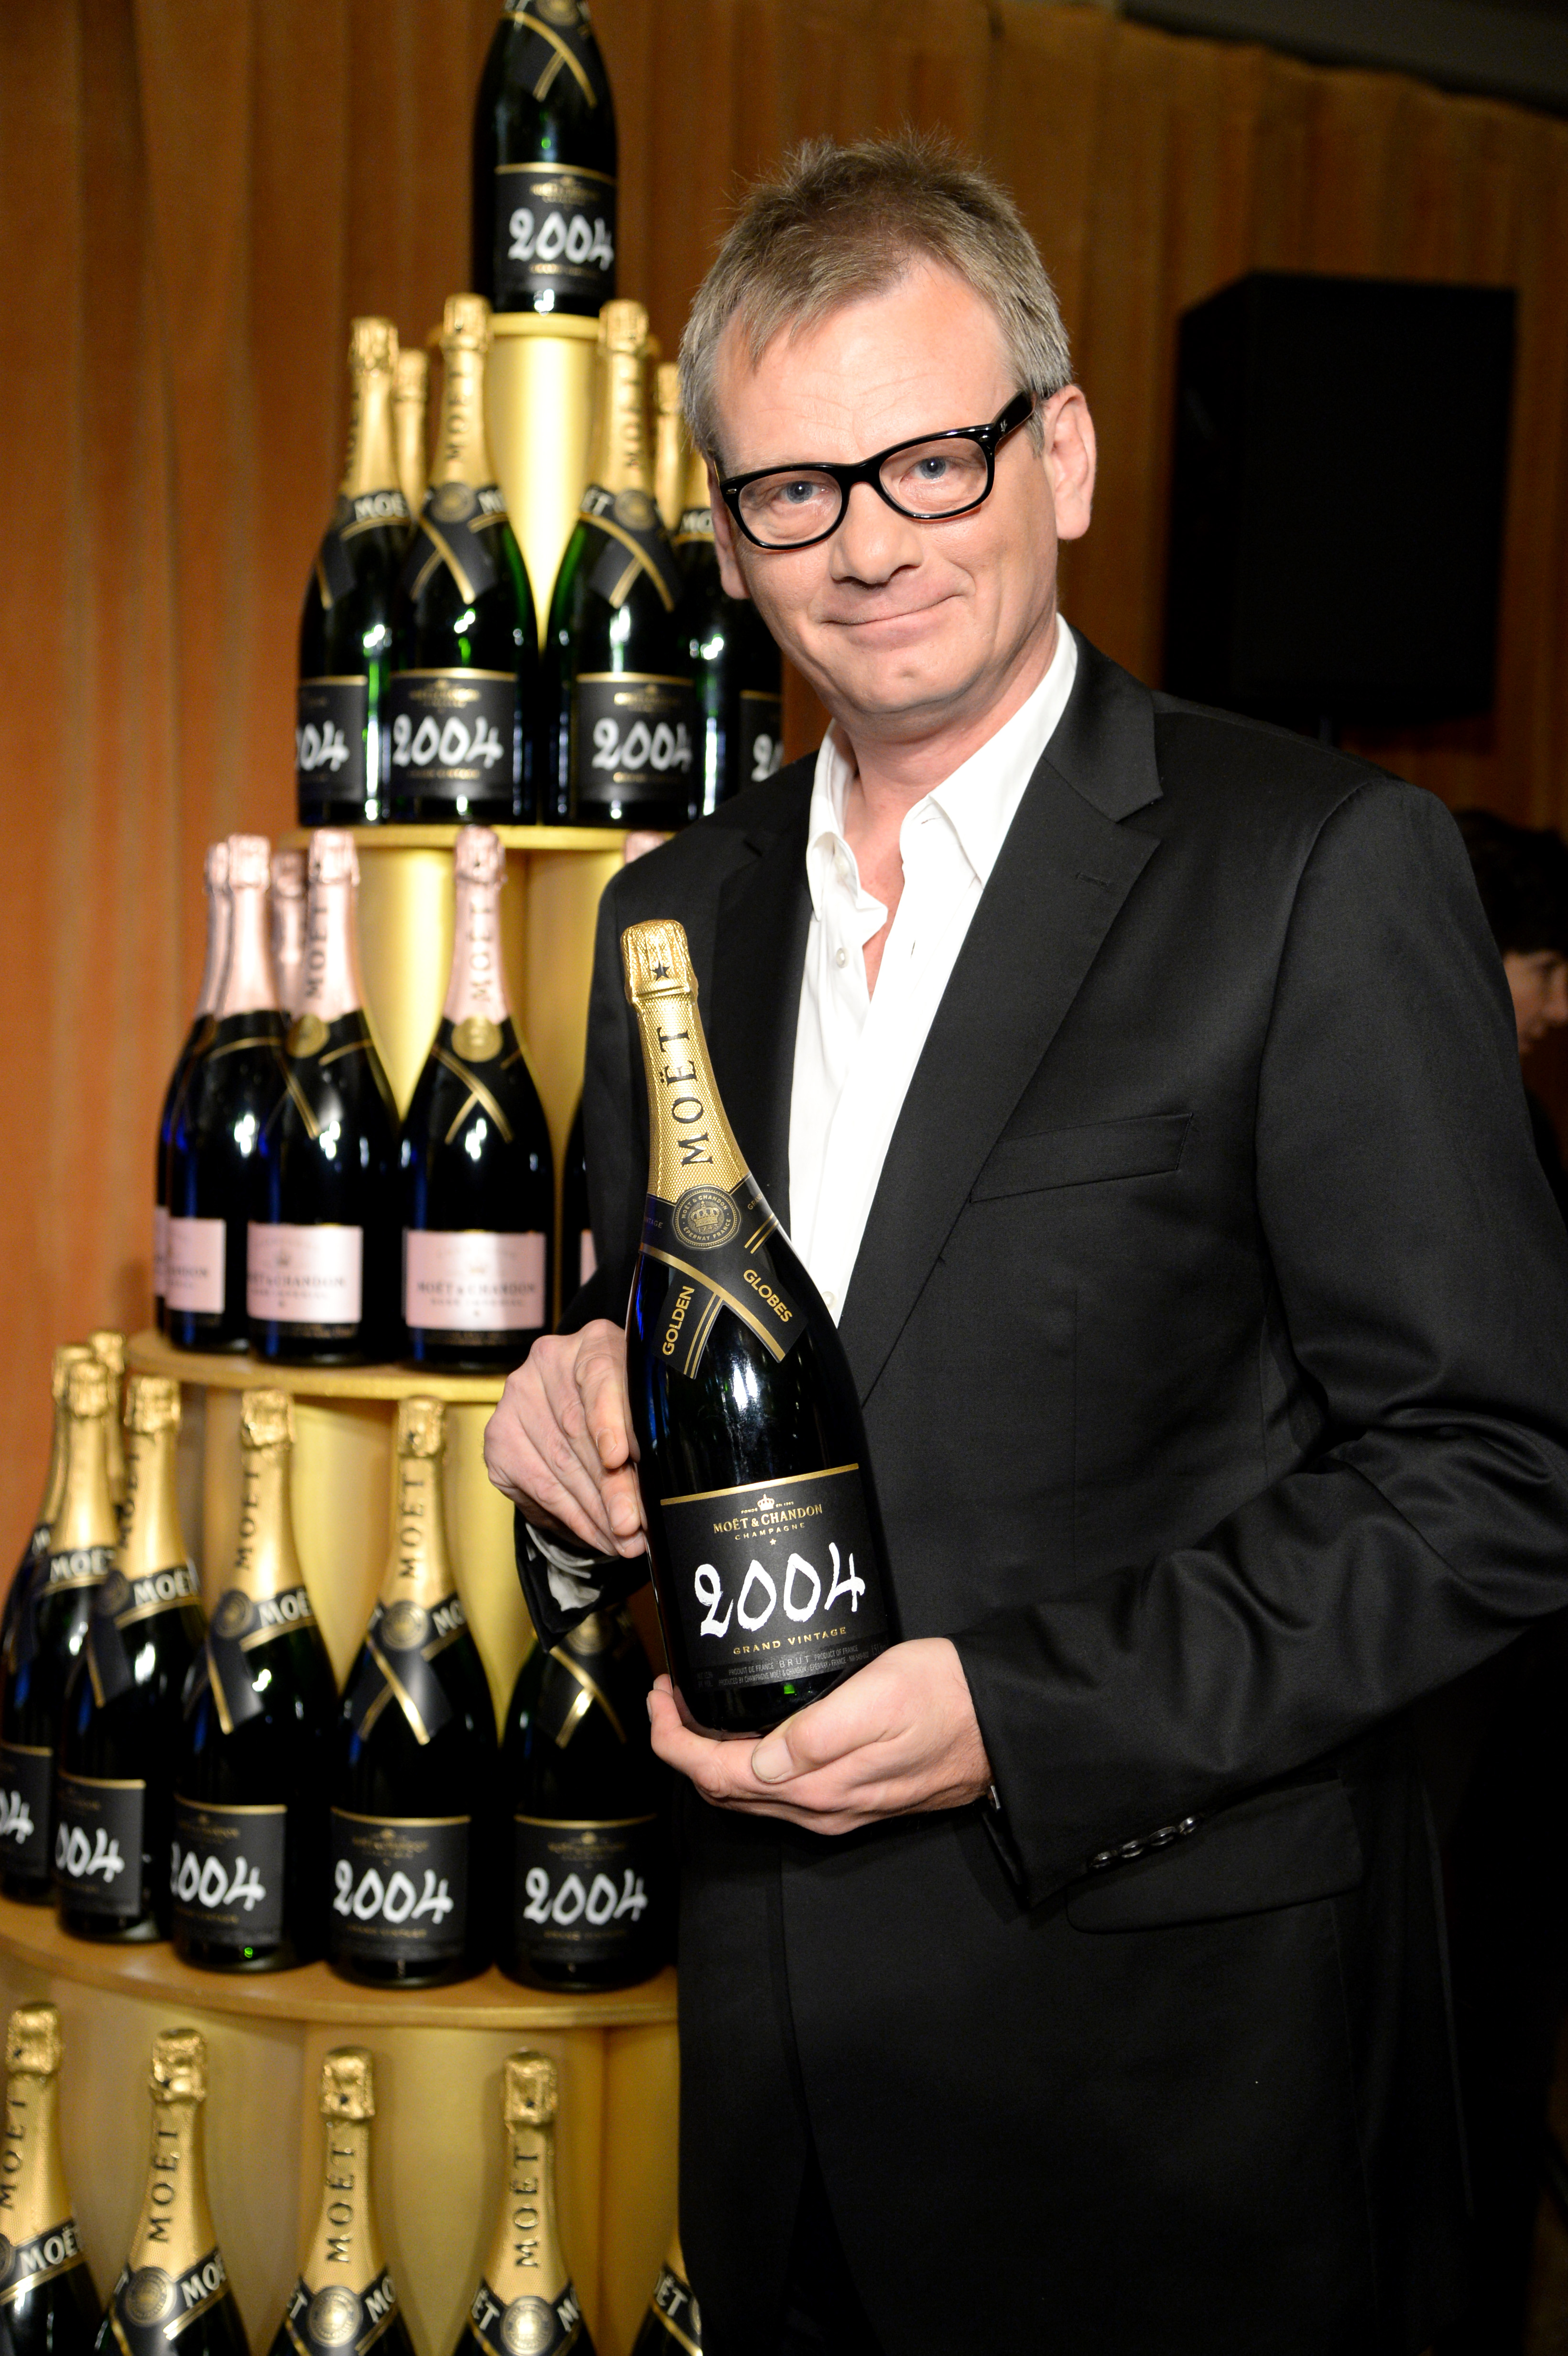 President of the Hollywood Foreign Press Association Theo Kingma attends the Moet & Chandon Toast at The 72nd Annual Golden Globe Awards Nominations